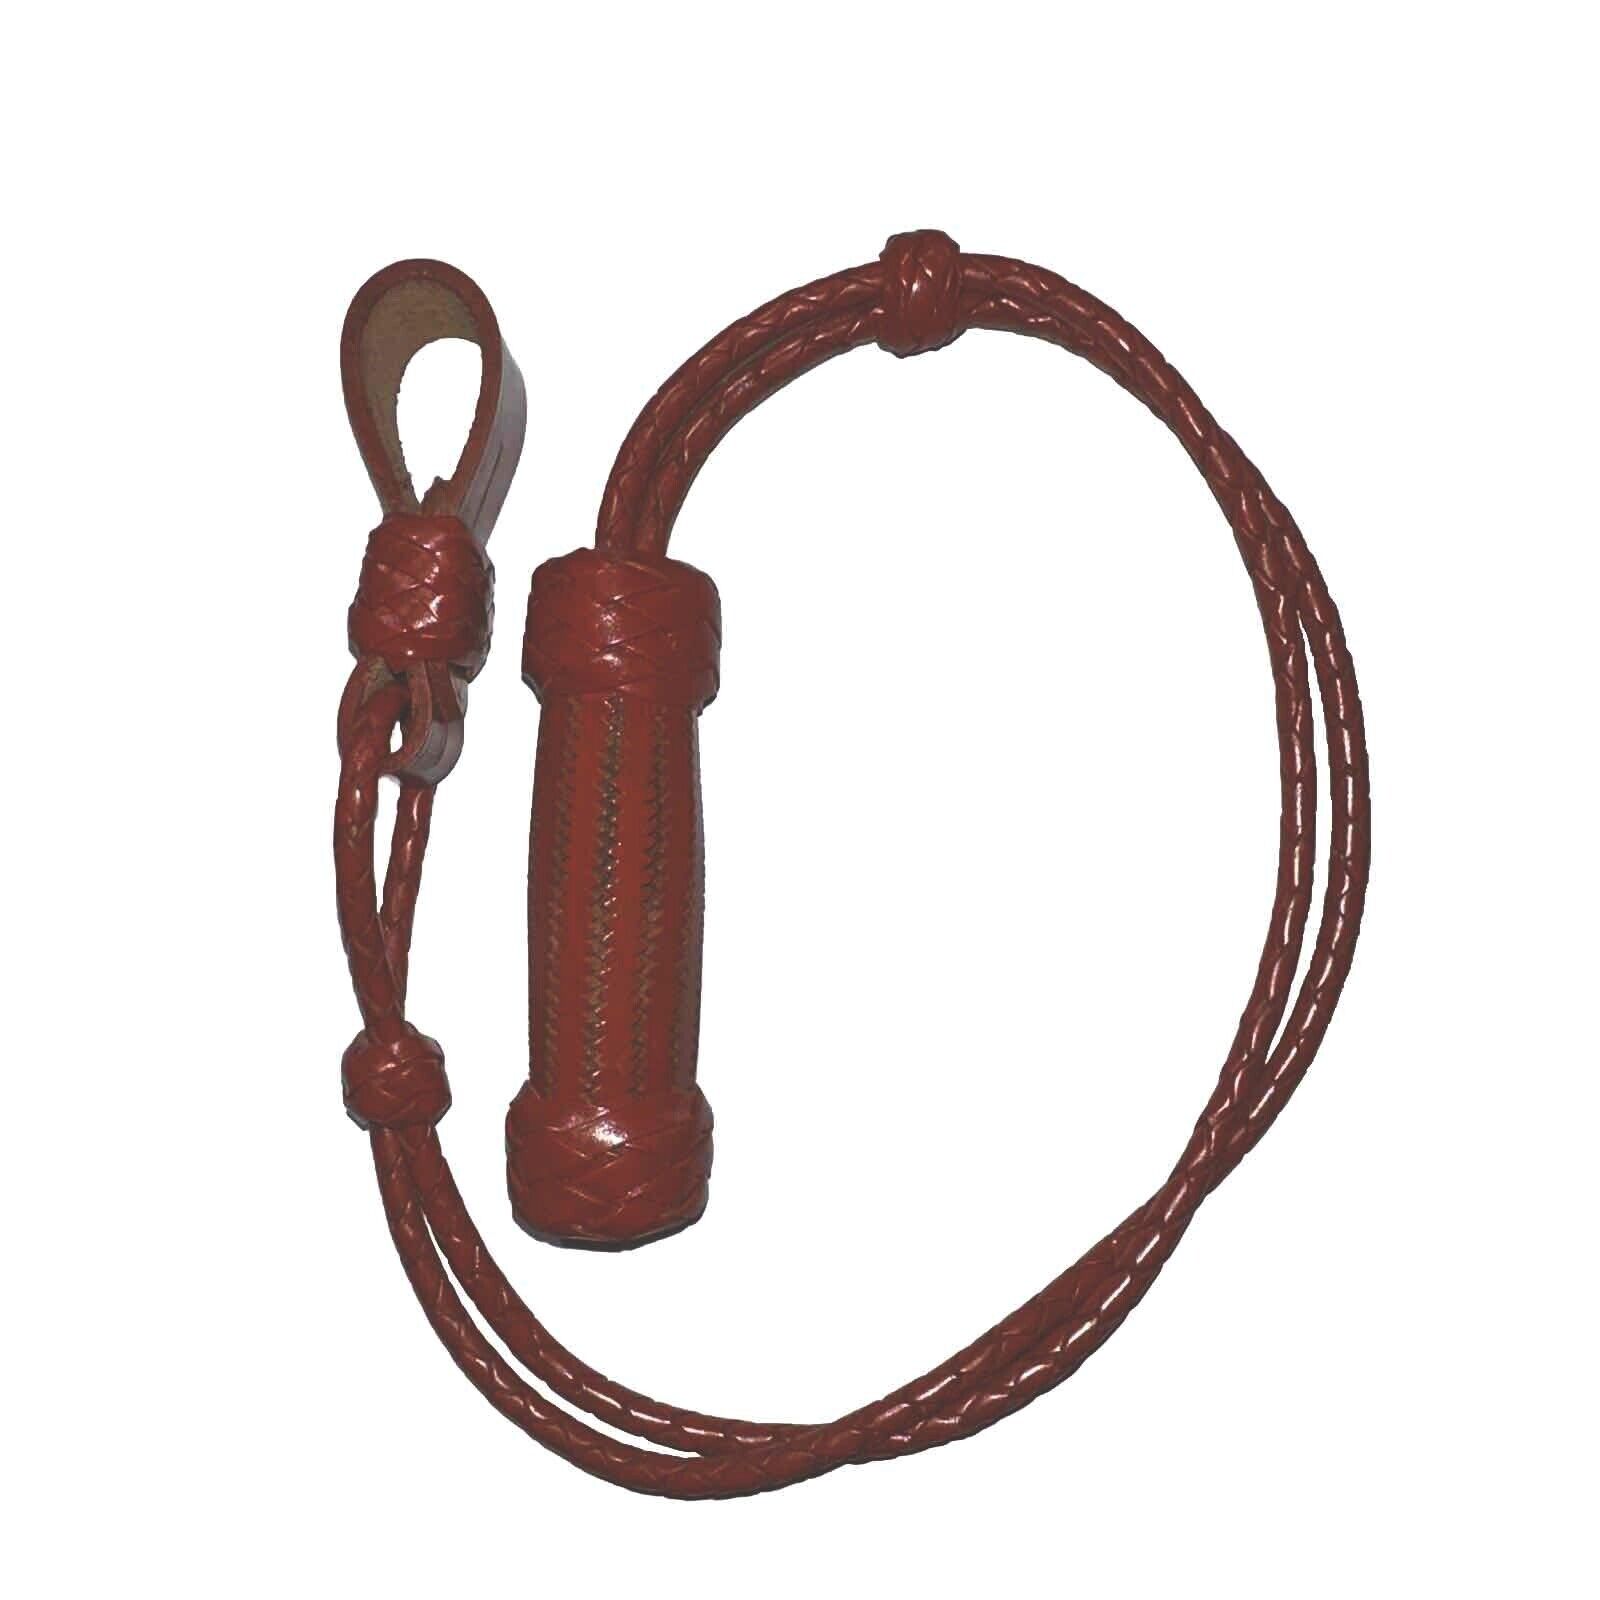 Leather Saber Knot for US Army M1902 Officer Saber